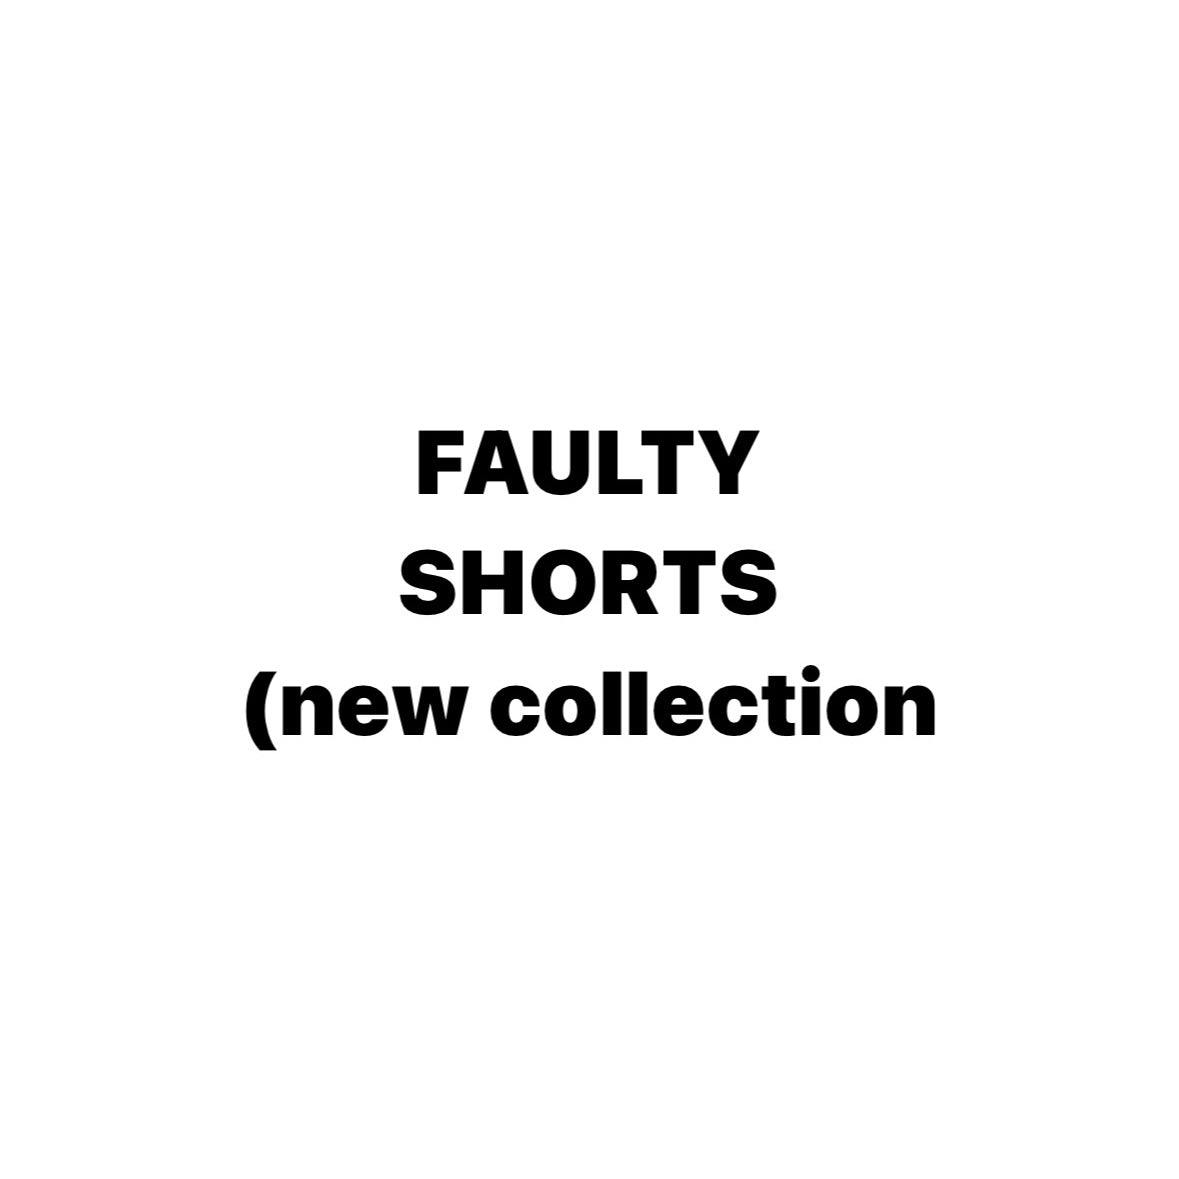 FAULTY - SHORTS (NEW COLLECTION)